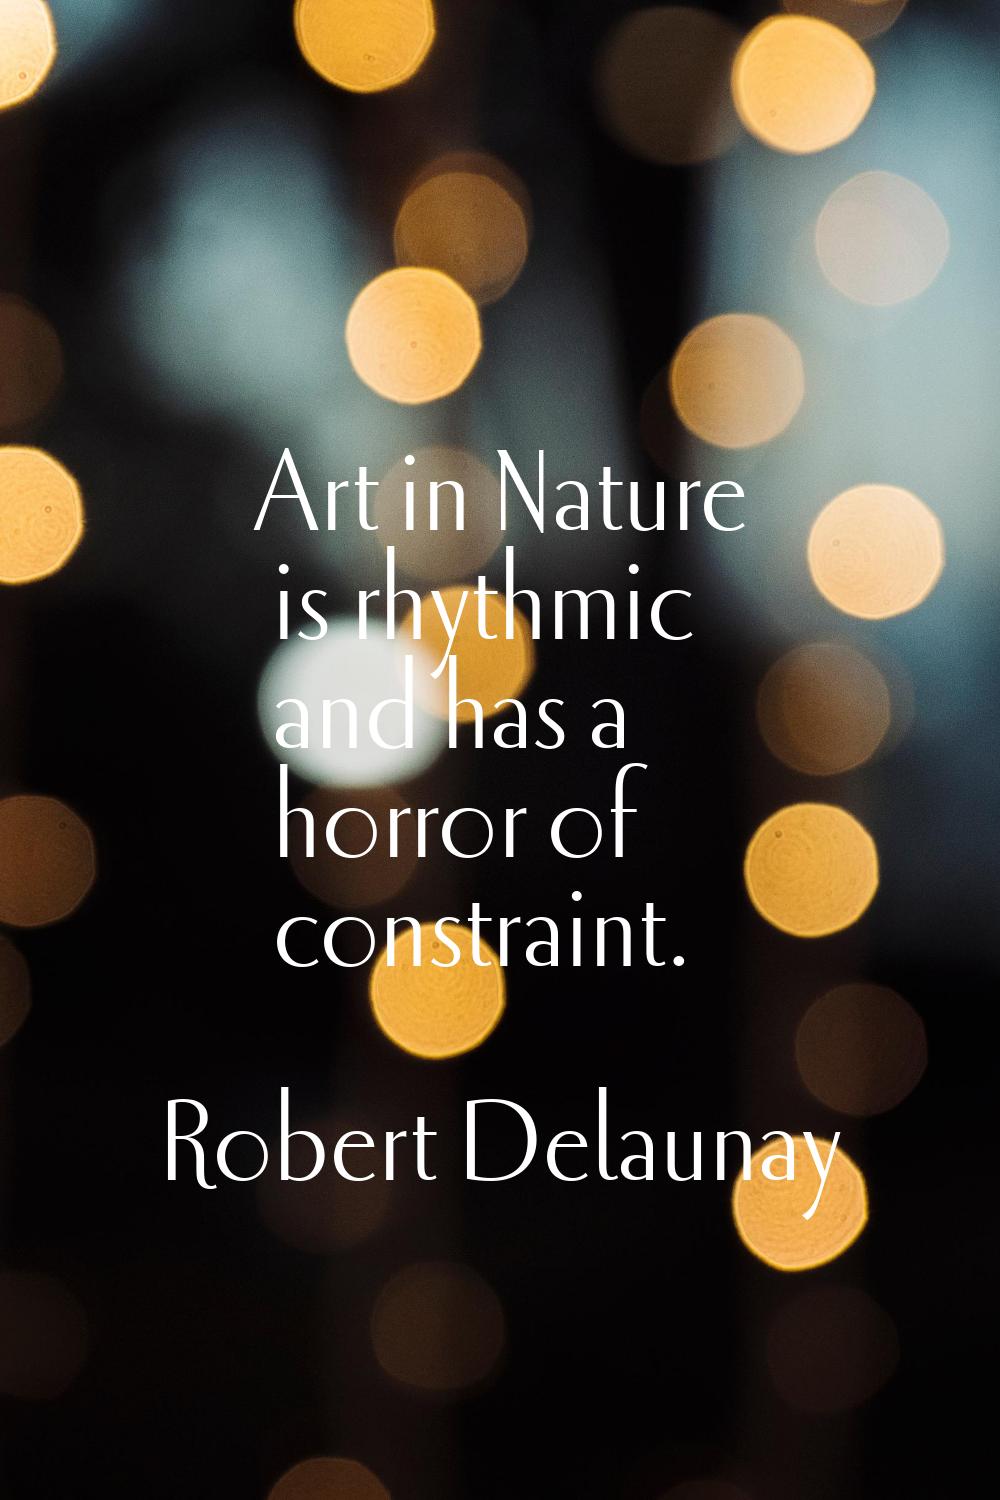 Art in Nature is rhythmic and has a horror of constraint.